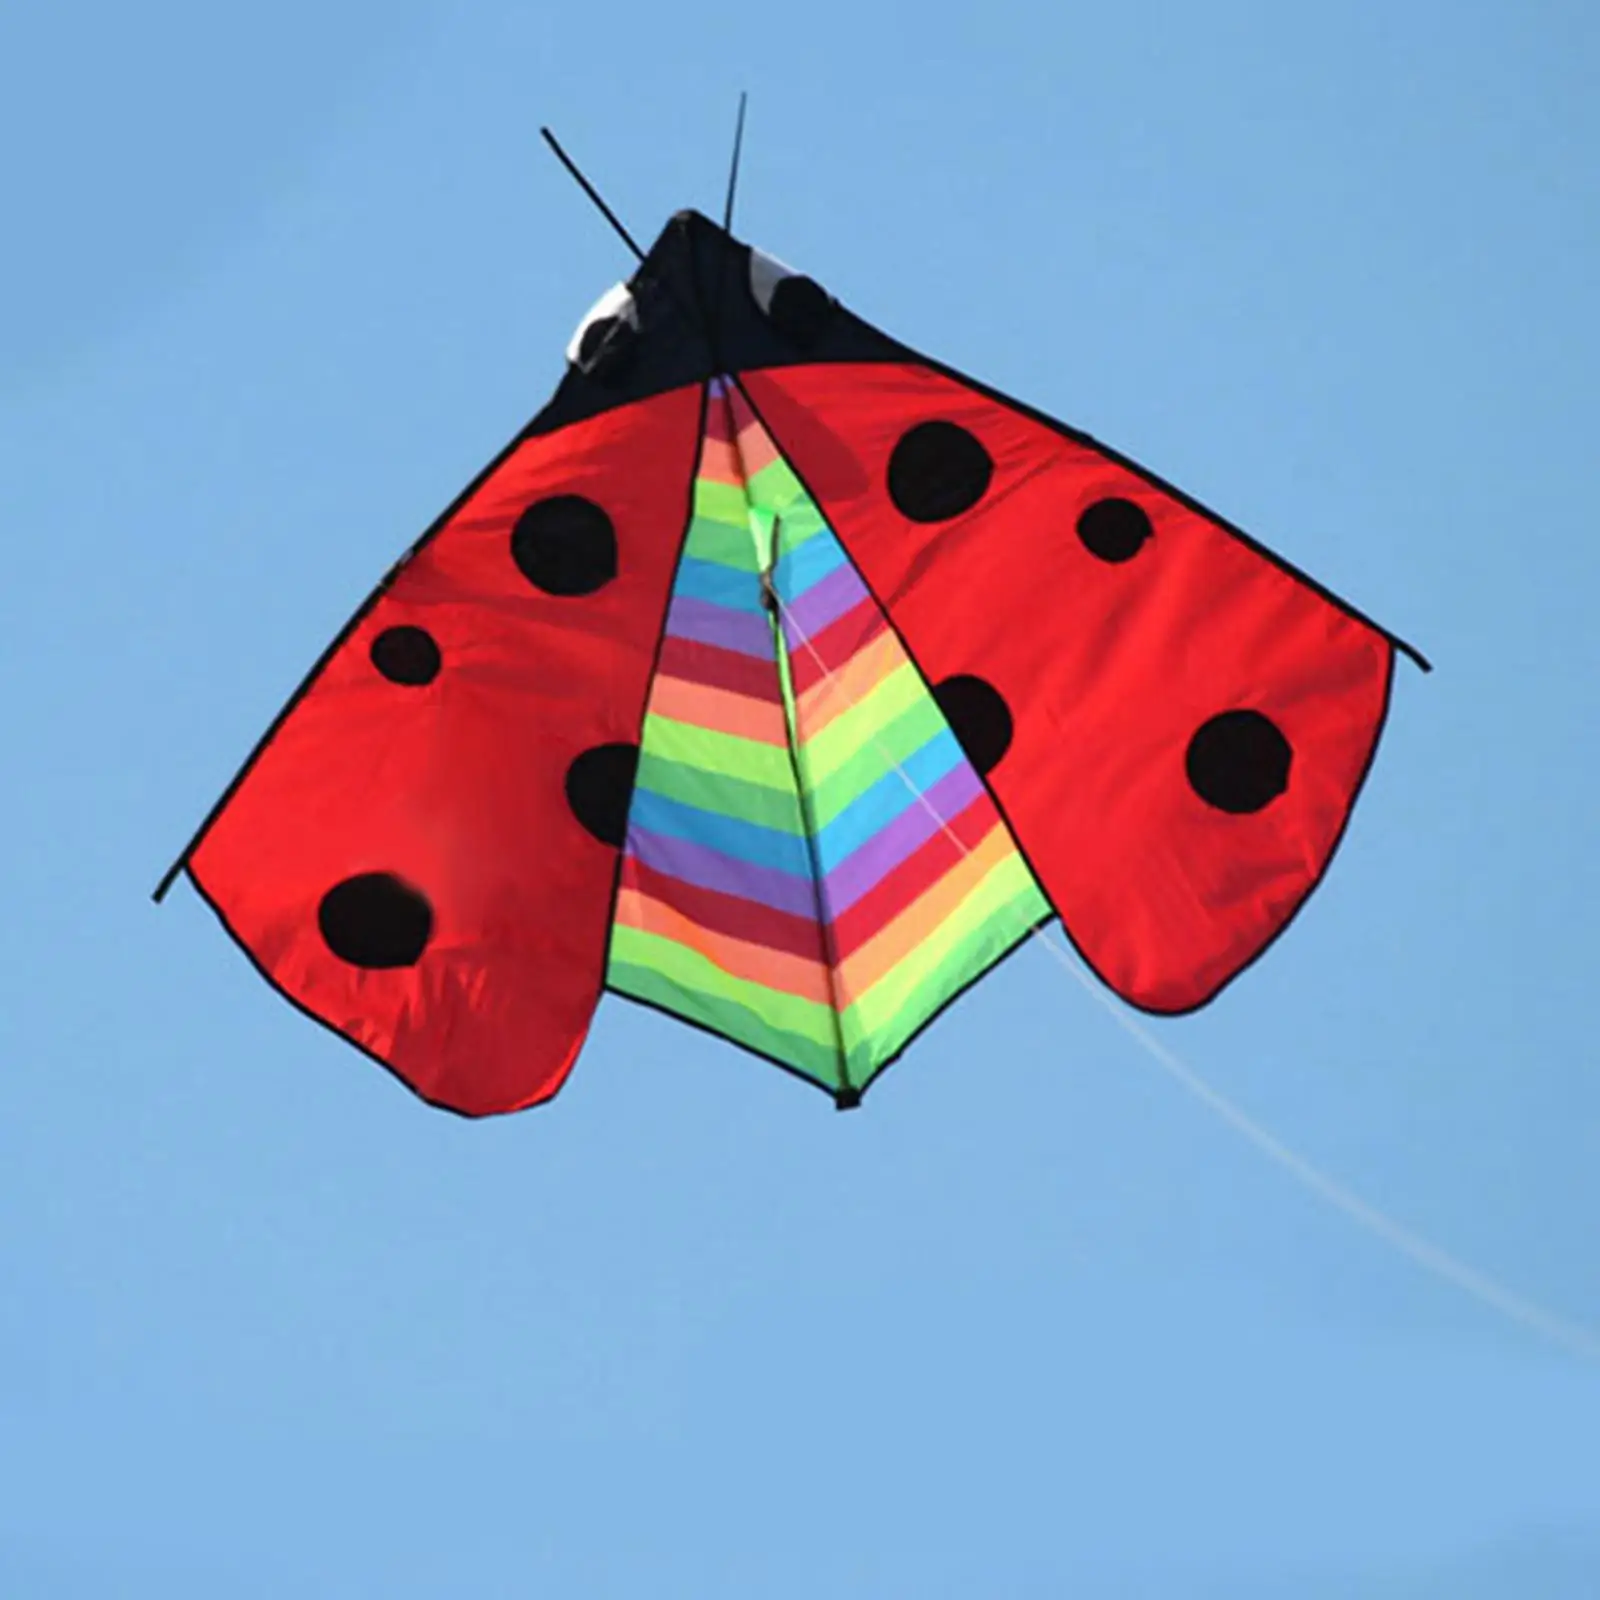 Novelty Triangle Ladybug Kite Fly Kite Huge Wingspan Easy Control Single Line Fun Toy Delta Kite for Park Family Trips Sports